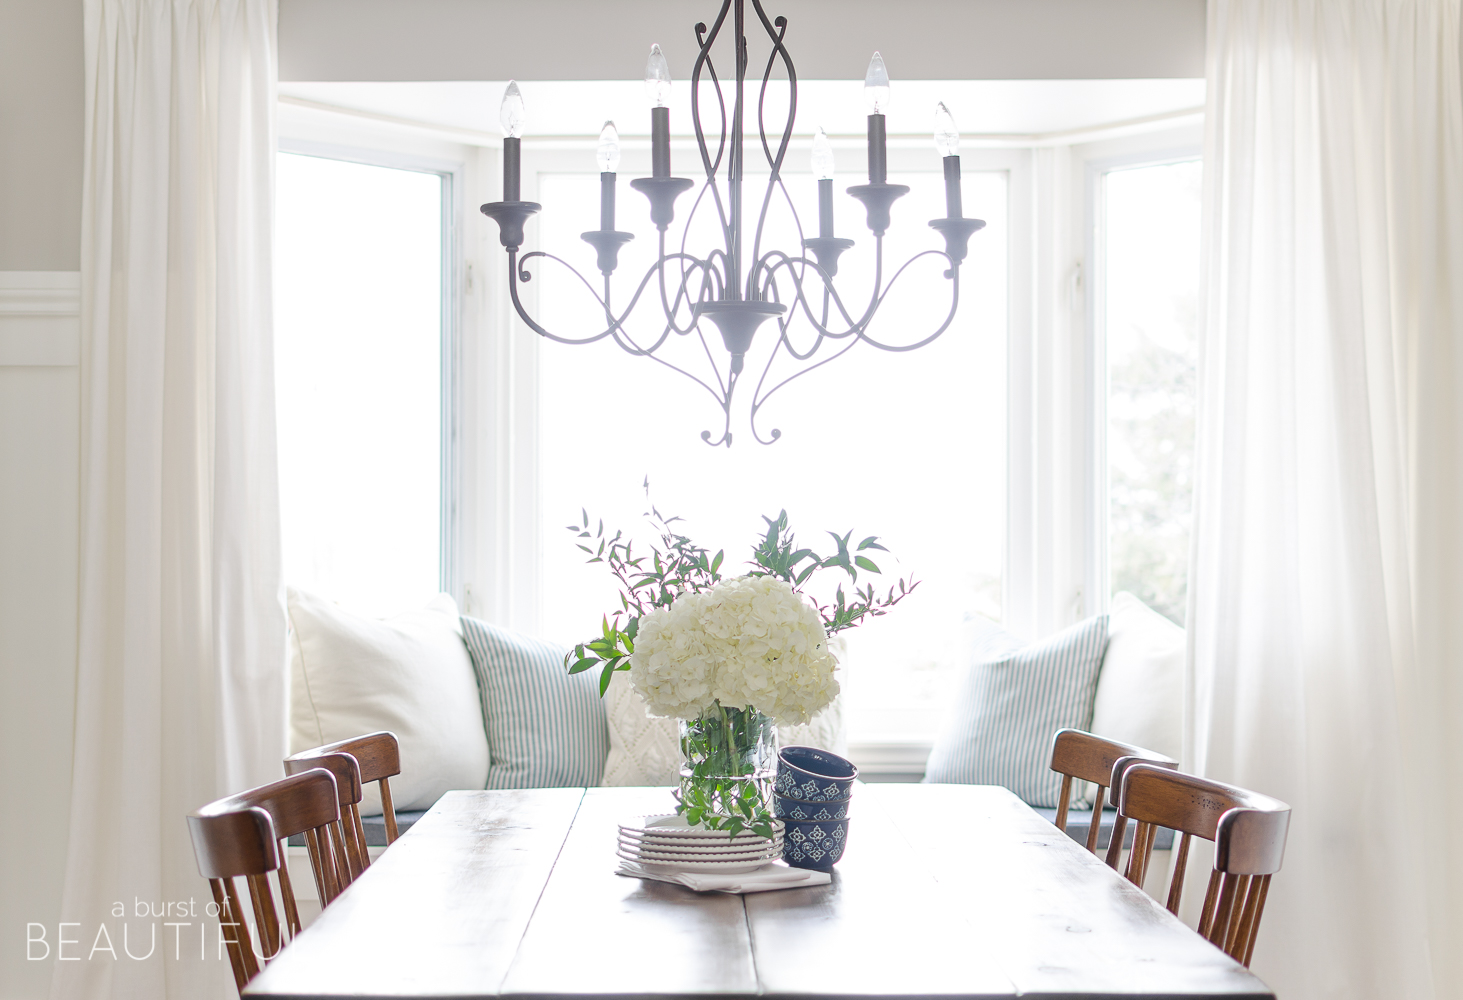 Spring Home Tour | Our Dining Room - A modern farmhouse feels bright and inviting as it embraces the spring season. Tour the full home at www.aburstofbeautiful.com. 